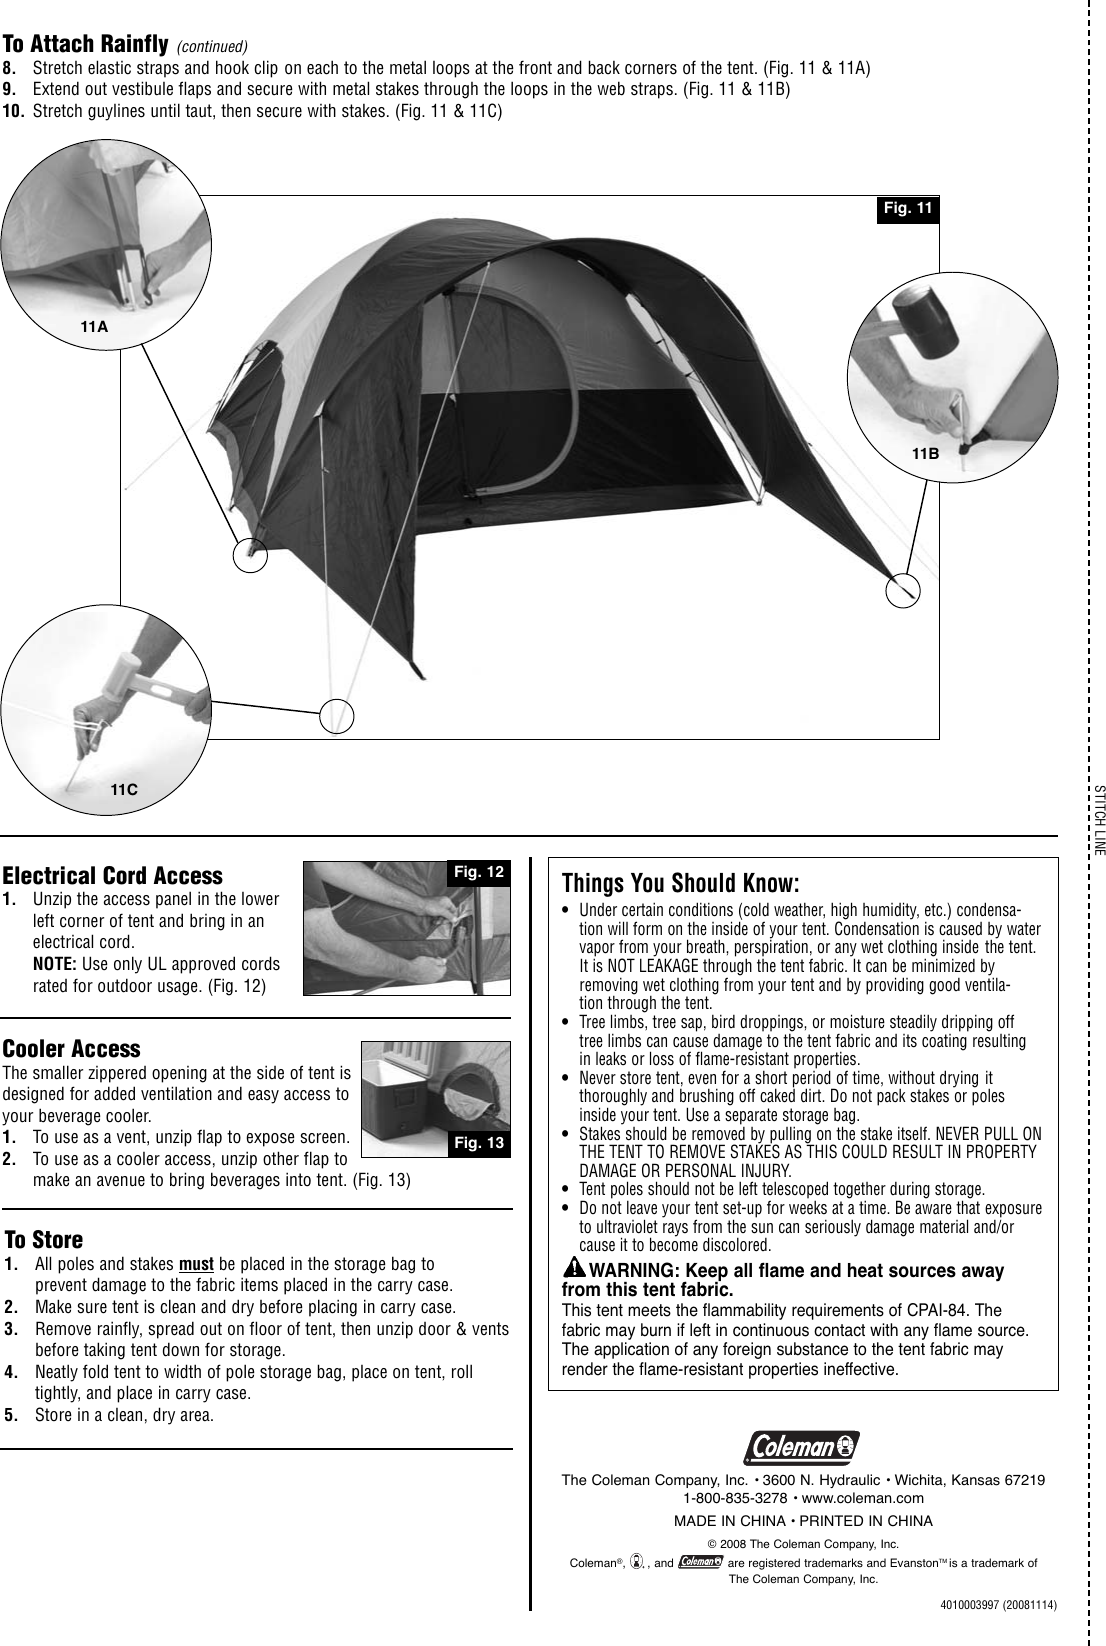 Page 2 of 2 - Coleman Coleman-2000001589-Users-Manual- Evanston 6 Tent 2000001589  Coleman-2000001589-users-manual